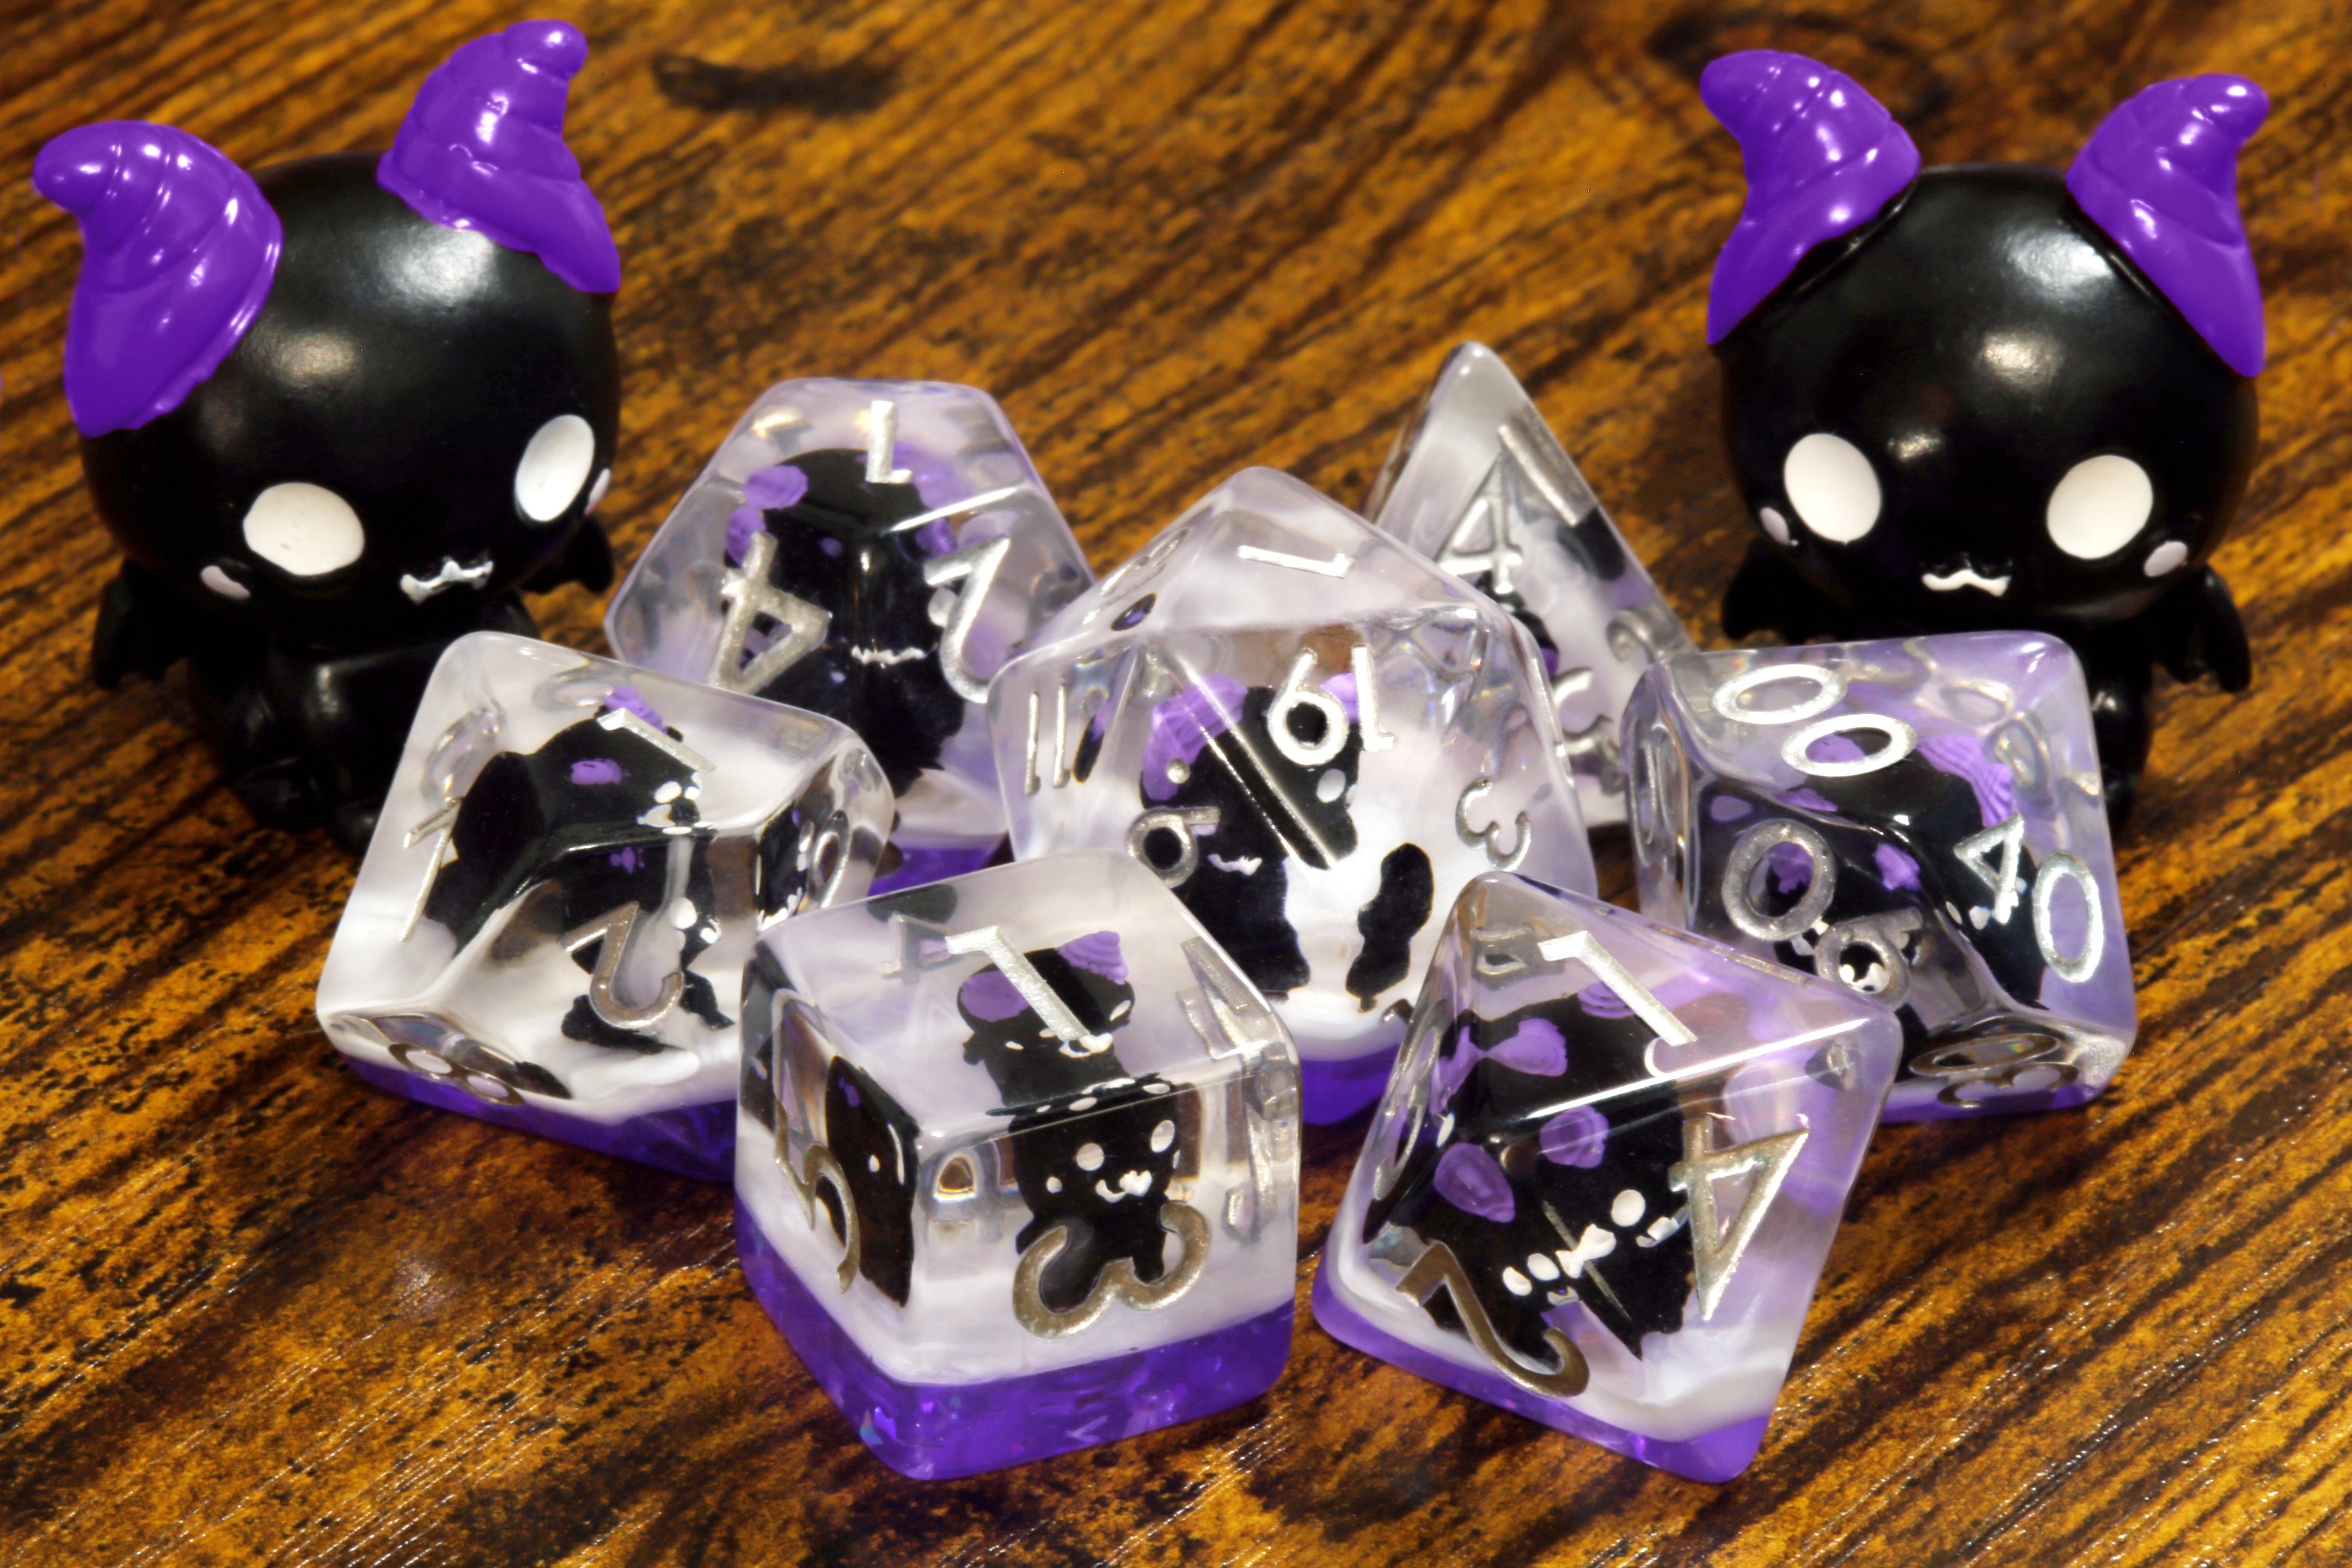 Cats of doom dice set - Dice set with winged cats on an purple layer - The Wizard's Vault